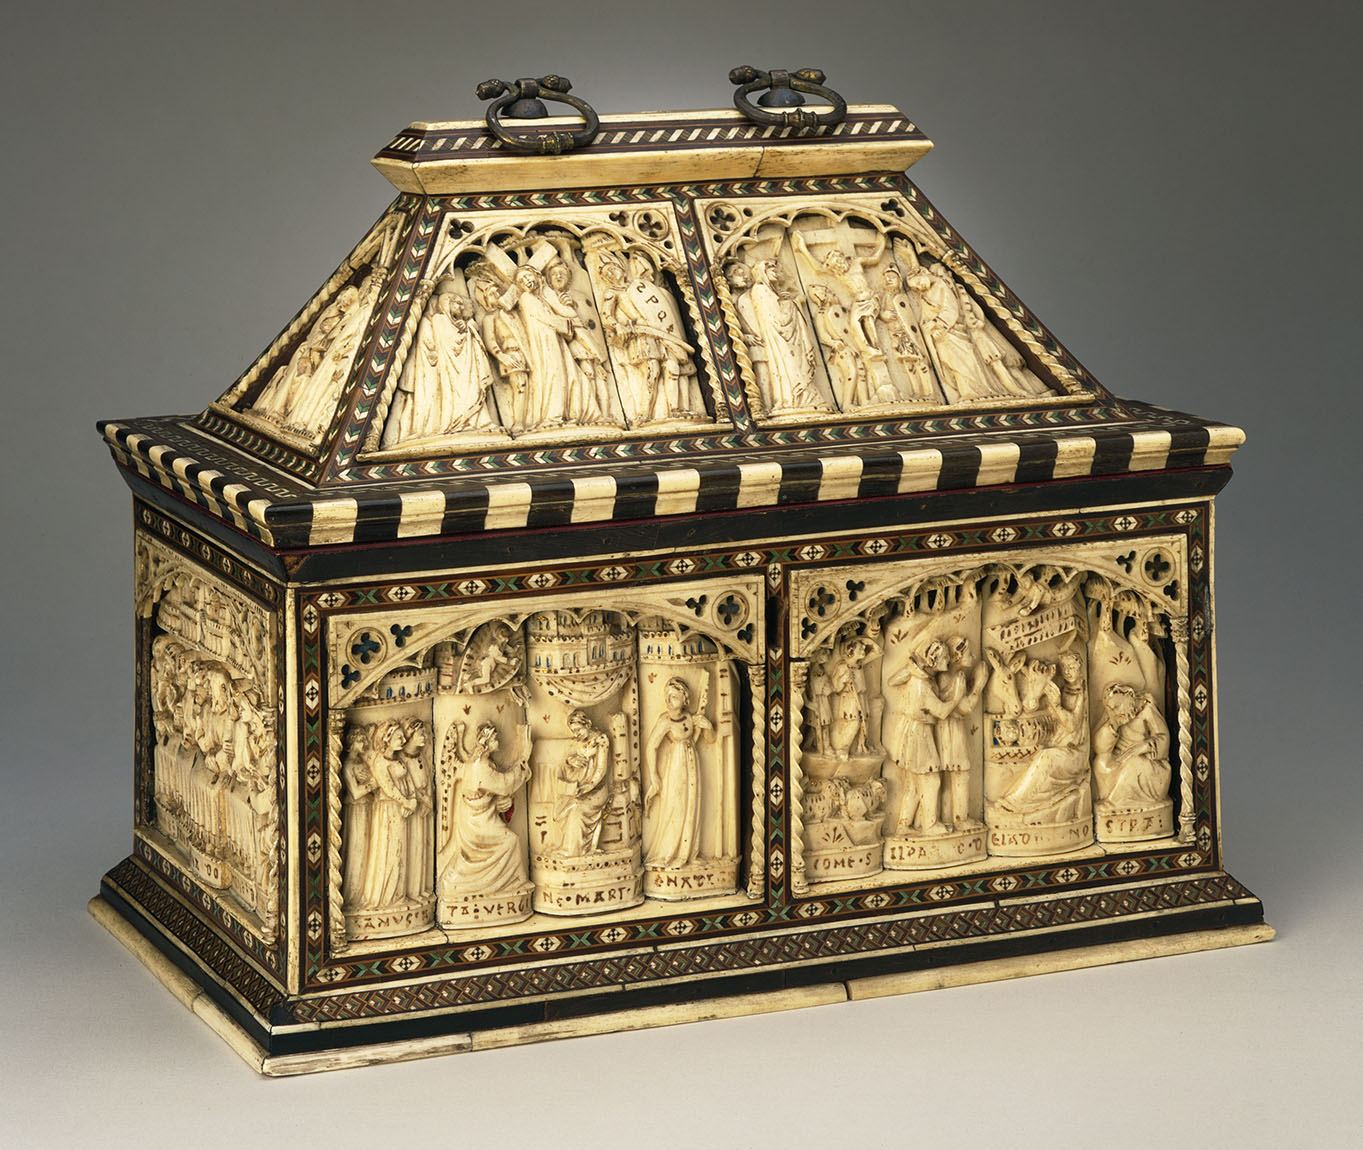 Decorative casket made of carved bone, stained horn, wood, pigment, and gilt metal from the 1400s